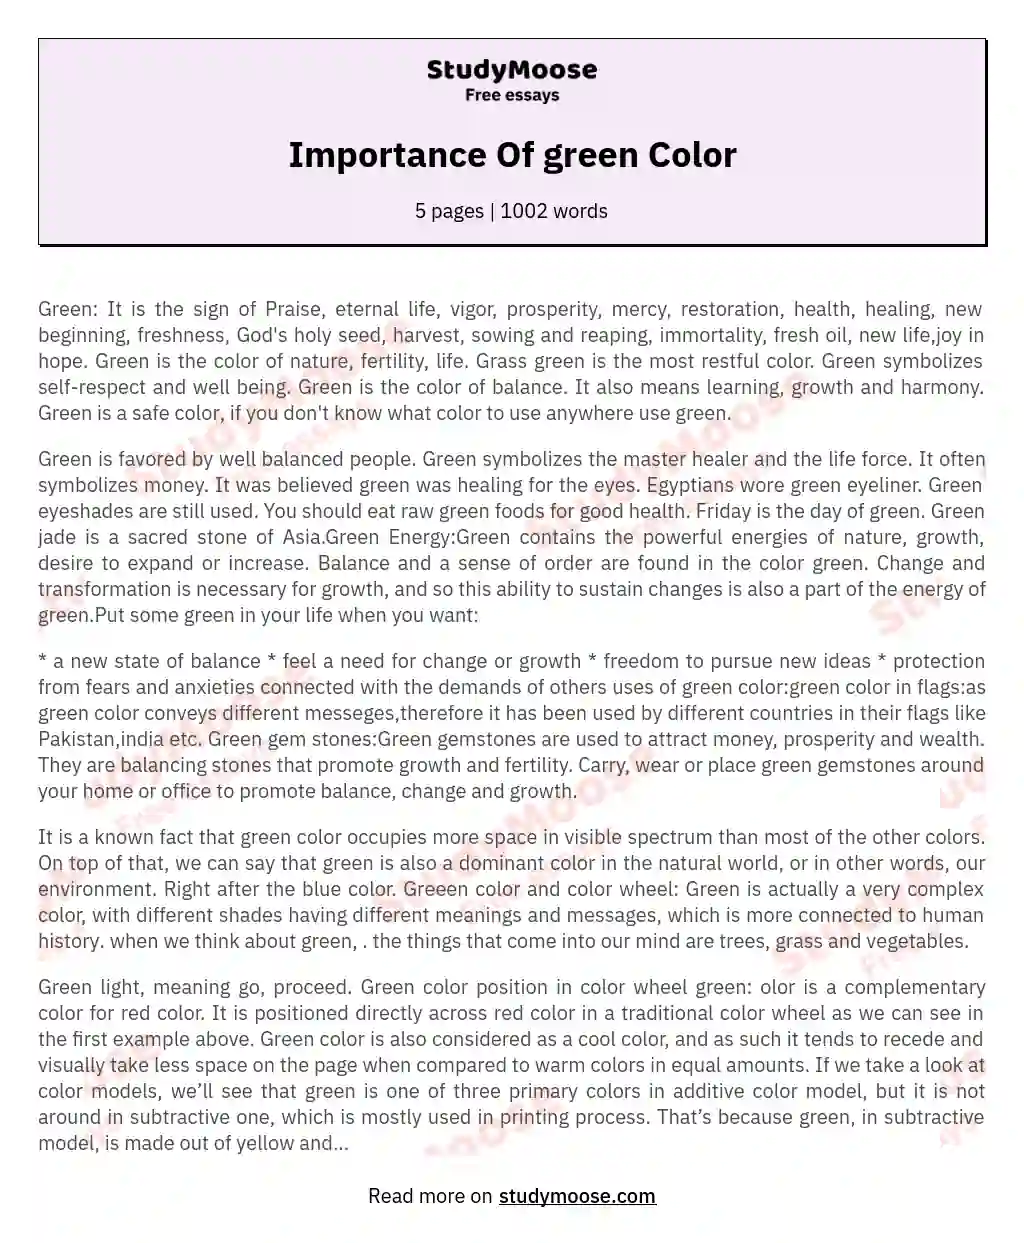 Importance Of green Color essay